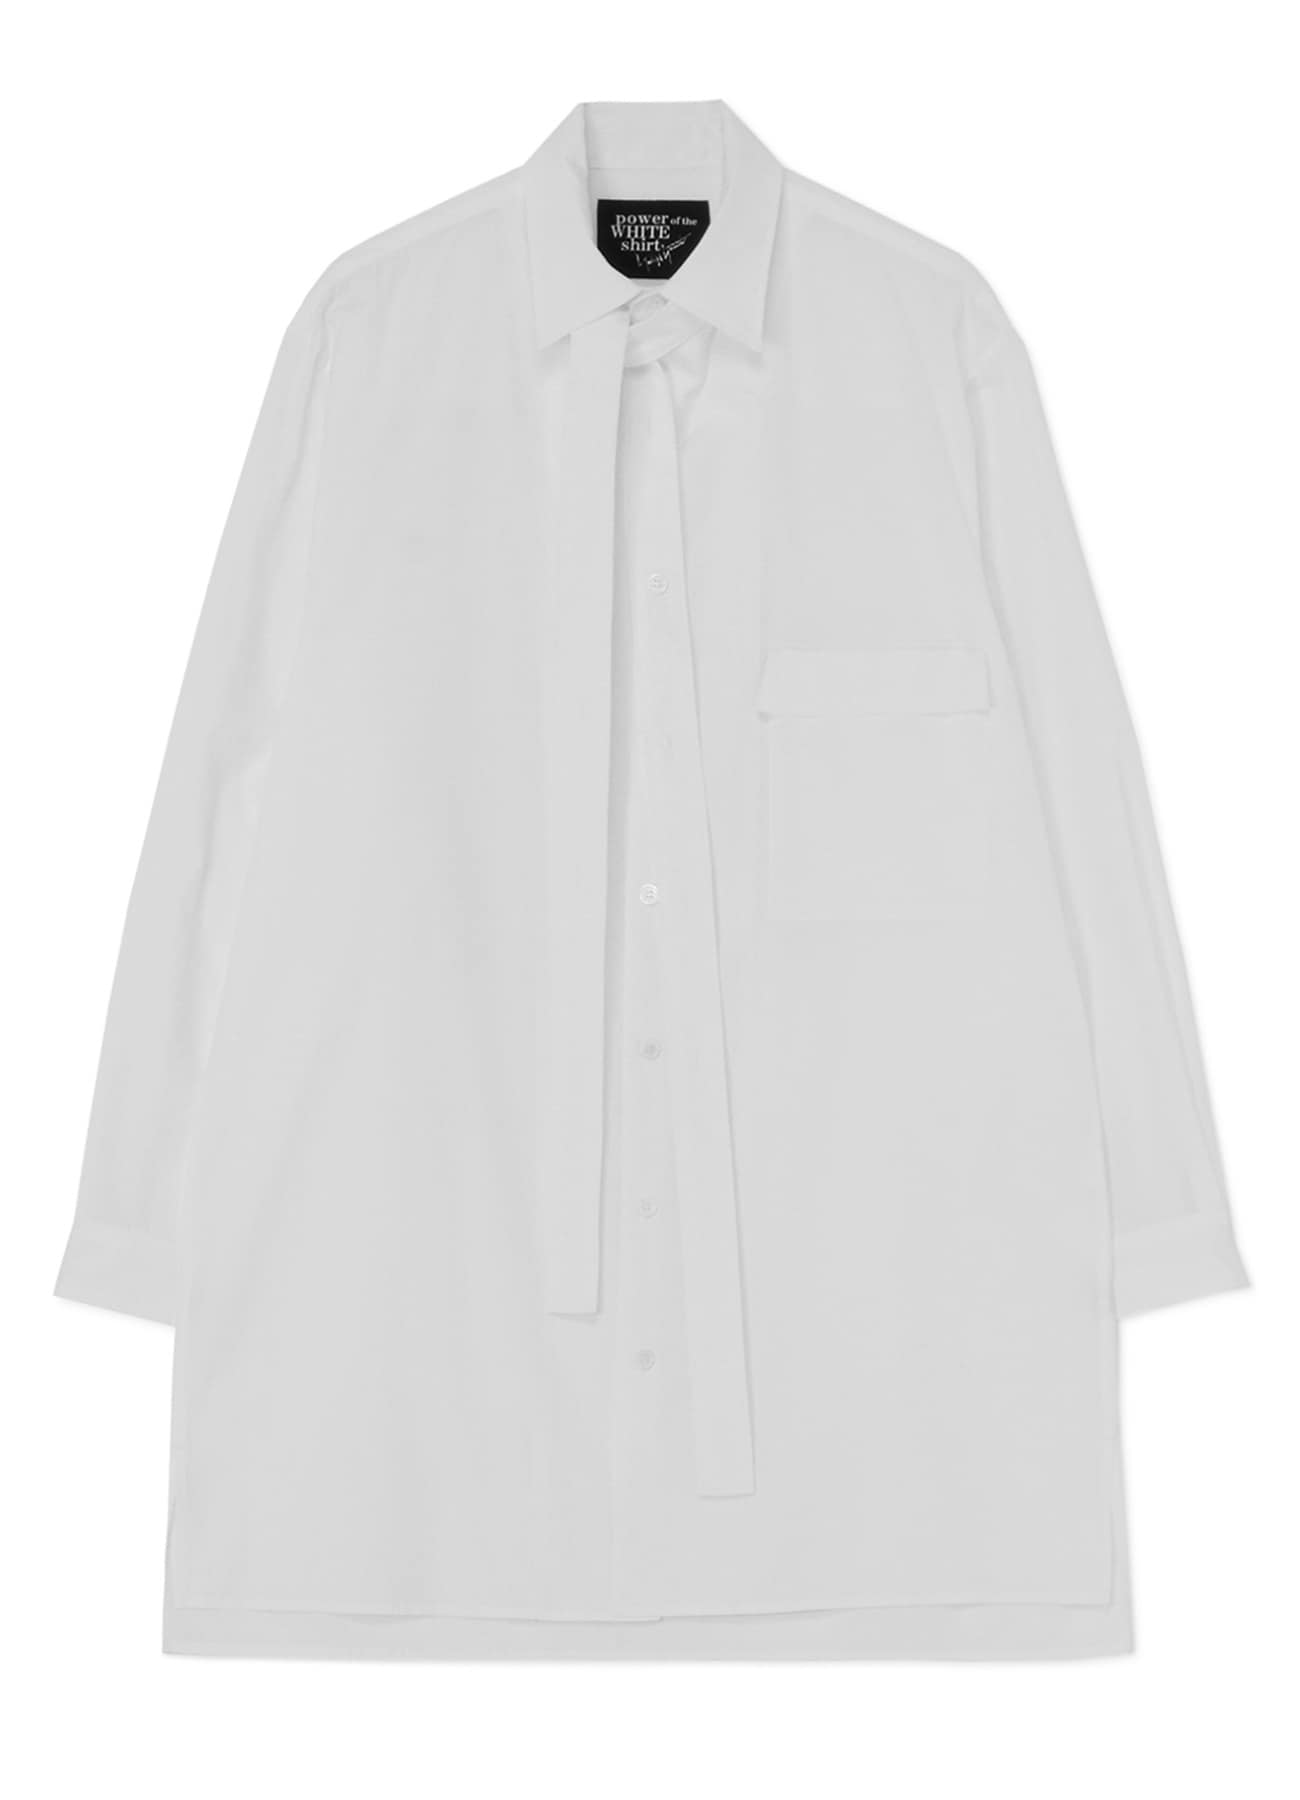 100/2 COTTON BROADCLOTH NECK TIE SHIRT(S White): power of the 